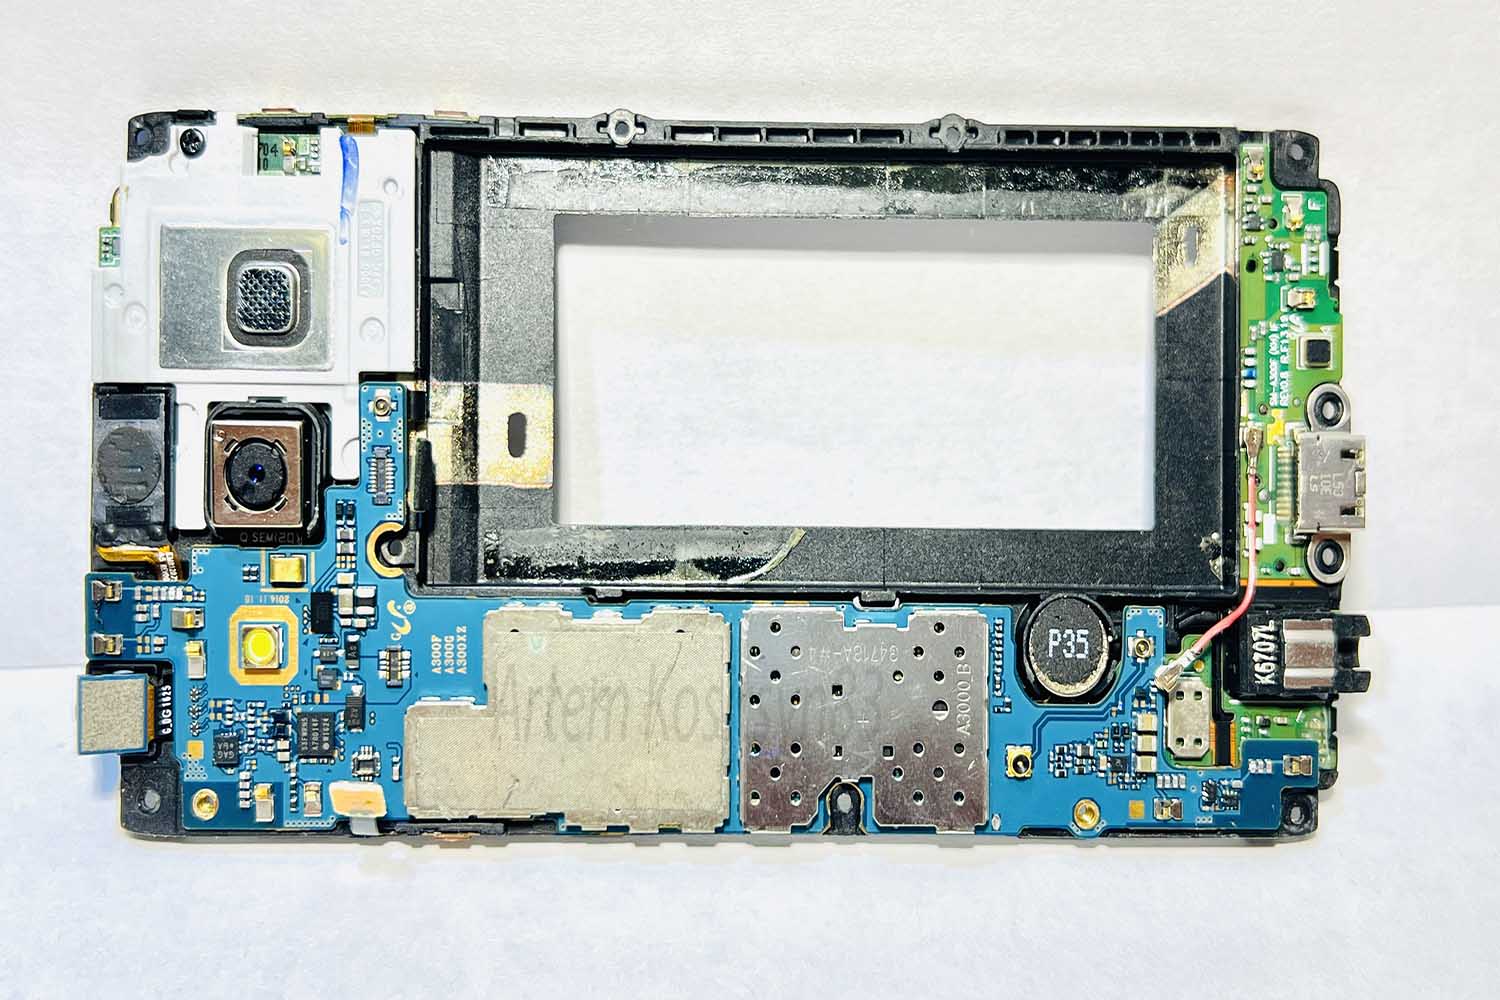 Подробнее о статье Samsung A300F. What electronic components are in this phone